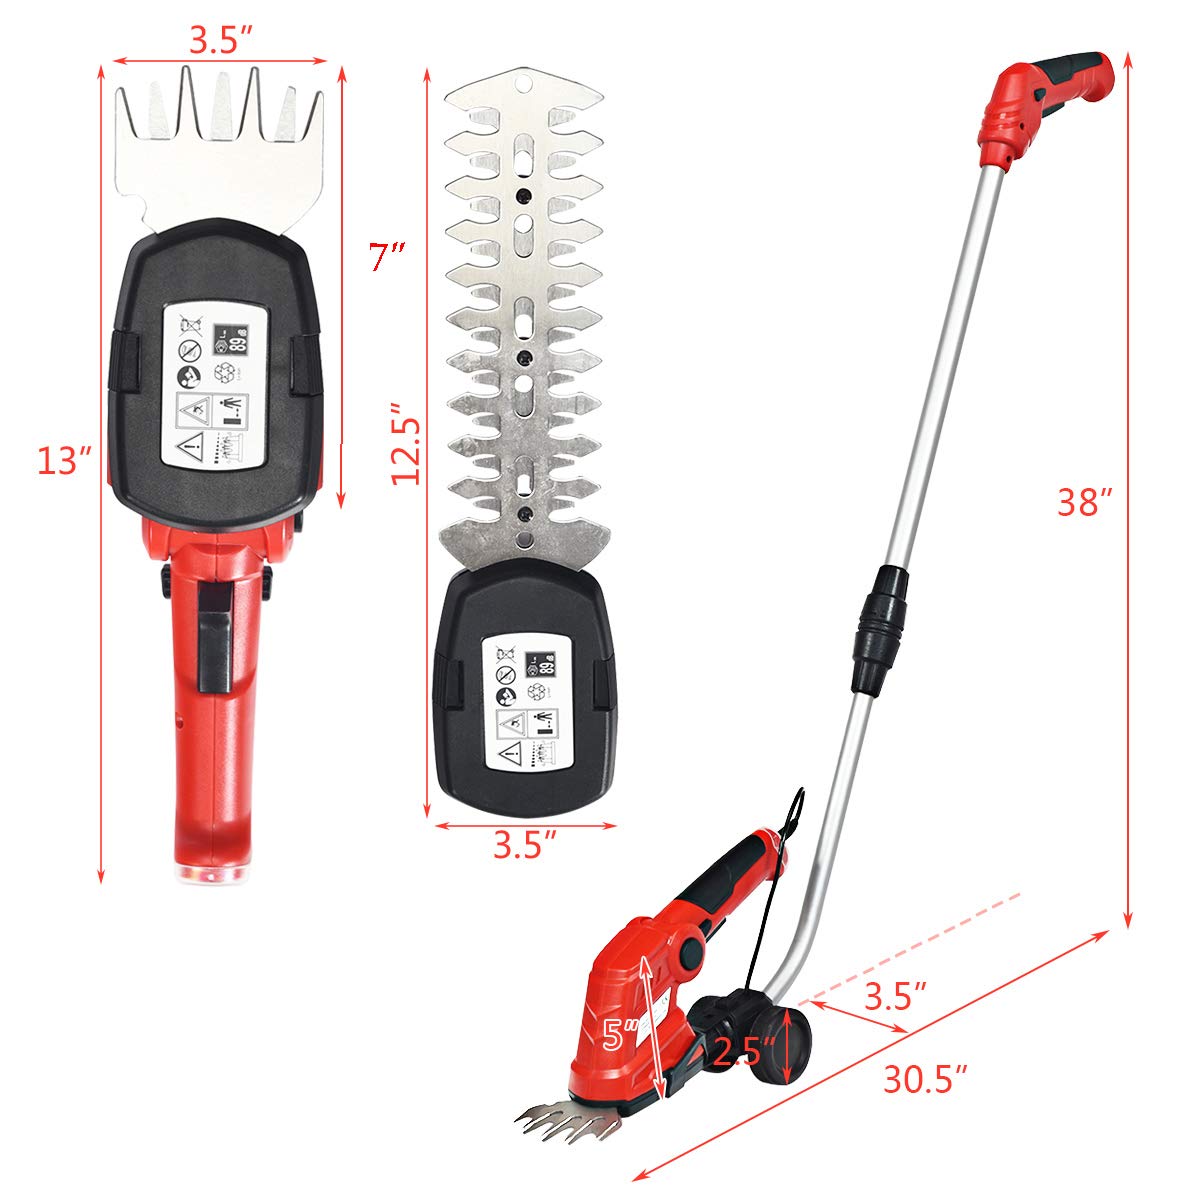 7.2V Cordless Grass Shear + Hedge Trimmer w/Wheeled Extension Pole and Rechargeable Battery